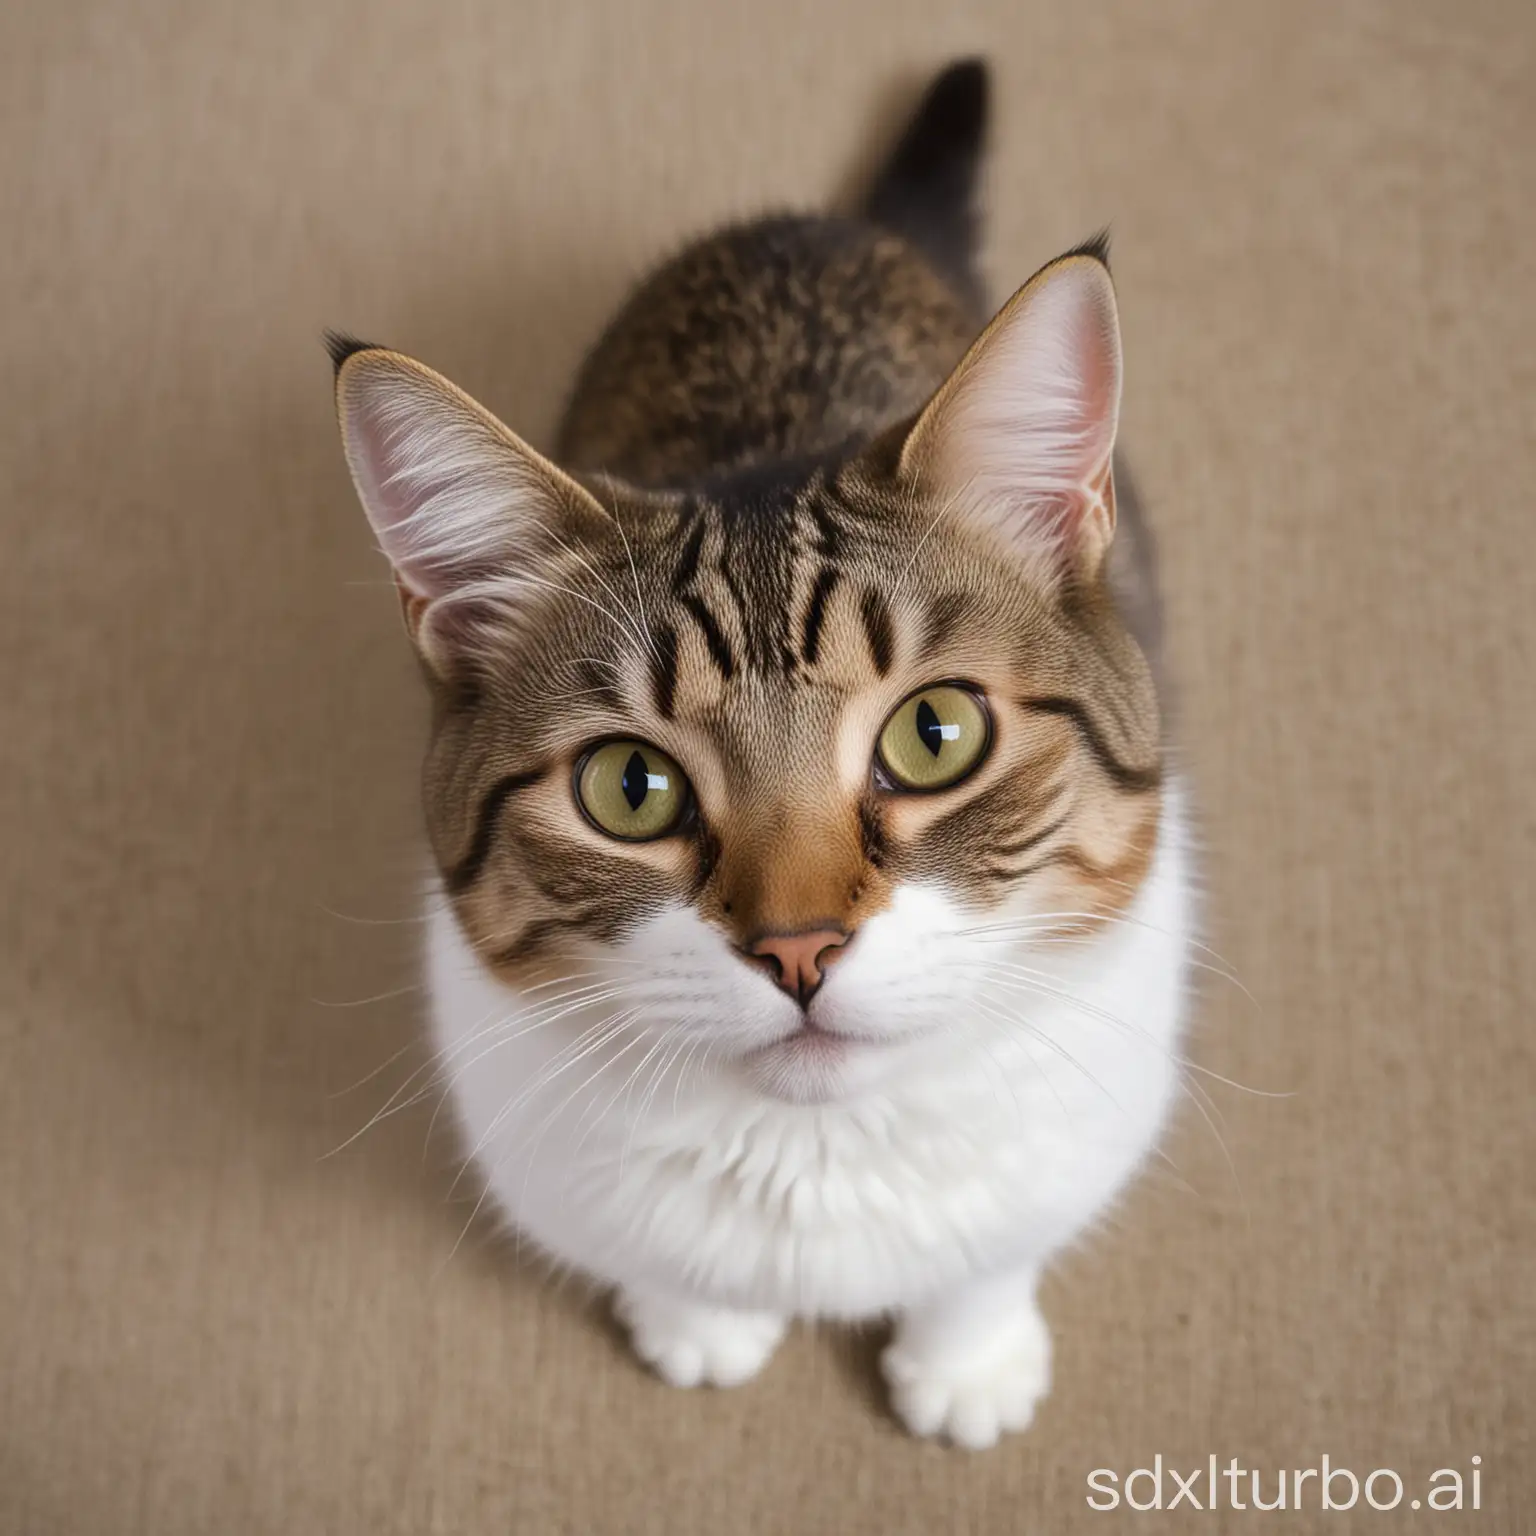 Playful-Tabby-Cat-with-Bright-Green-Eyes